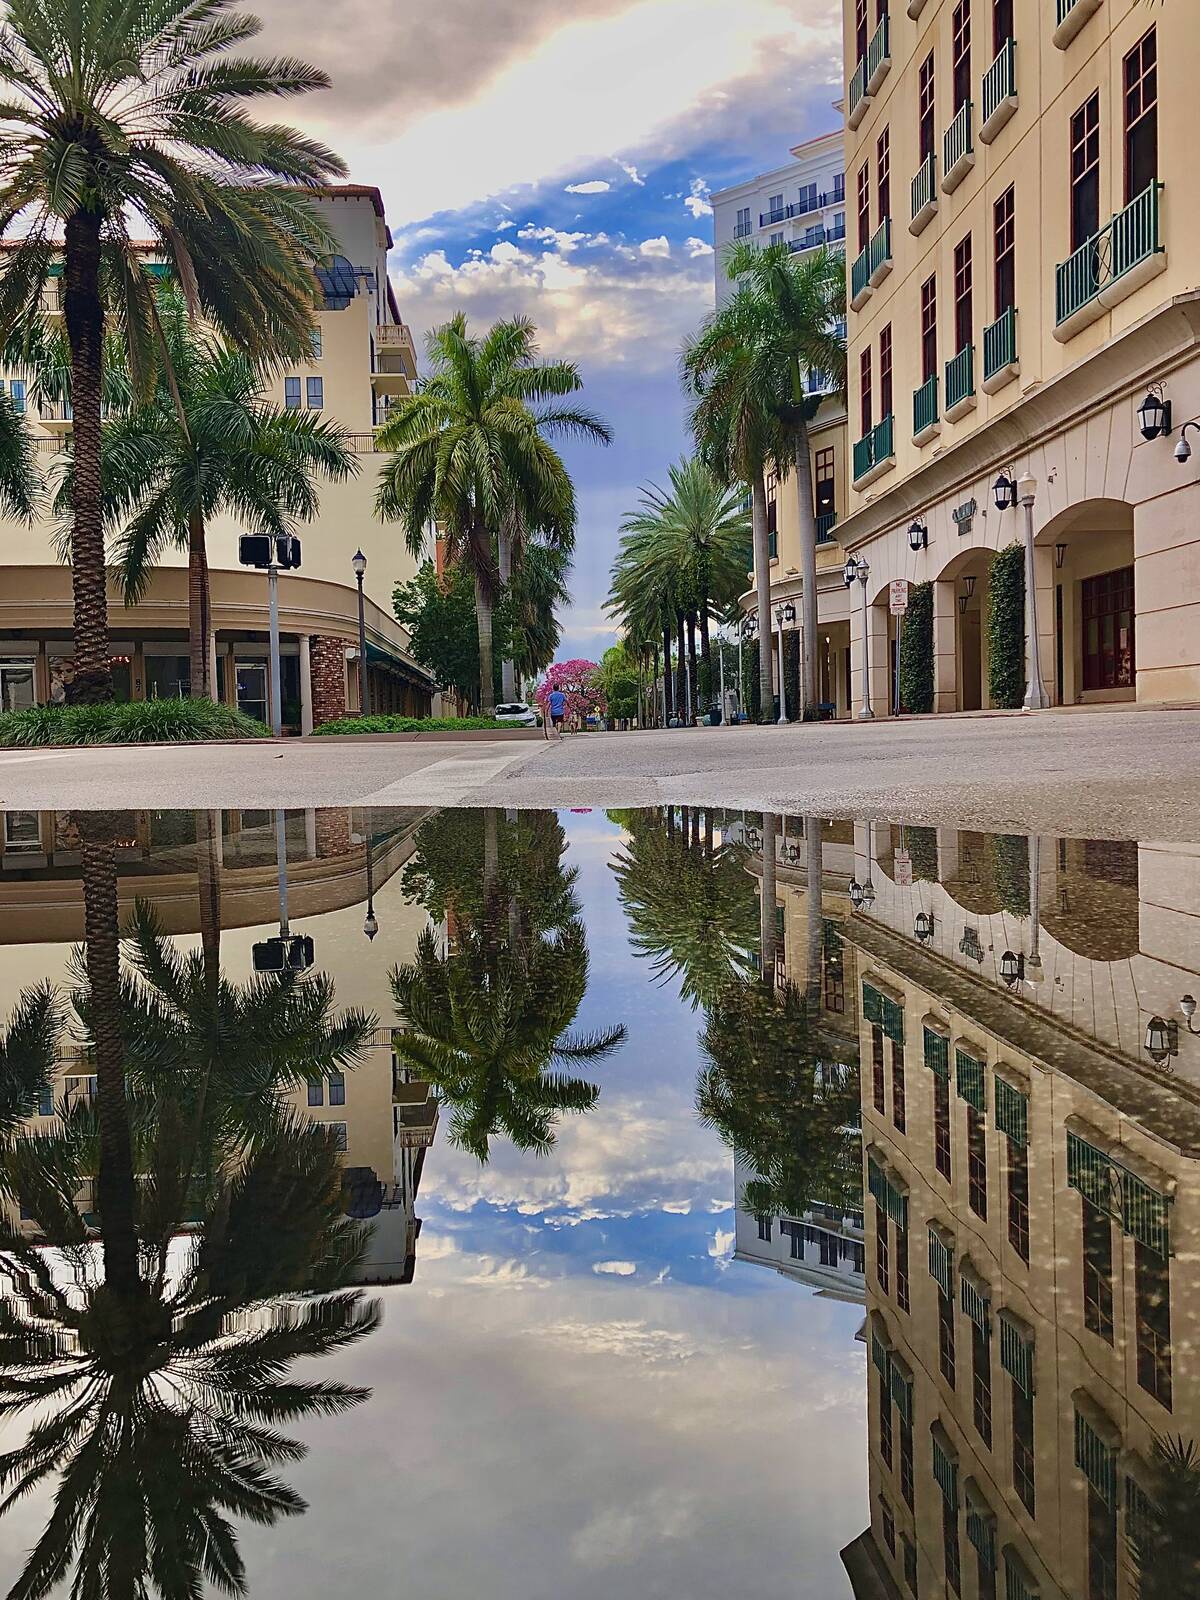 Image of Coral Gables - Miracle Mile by Salvatore Domina